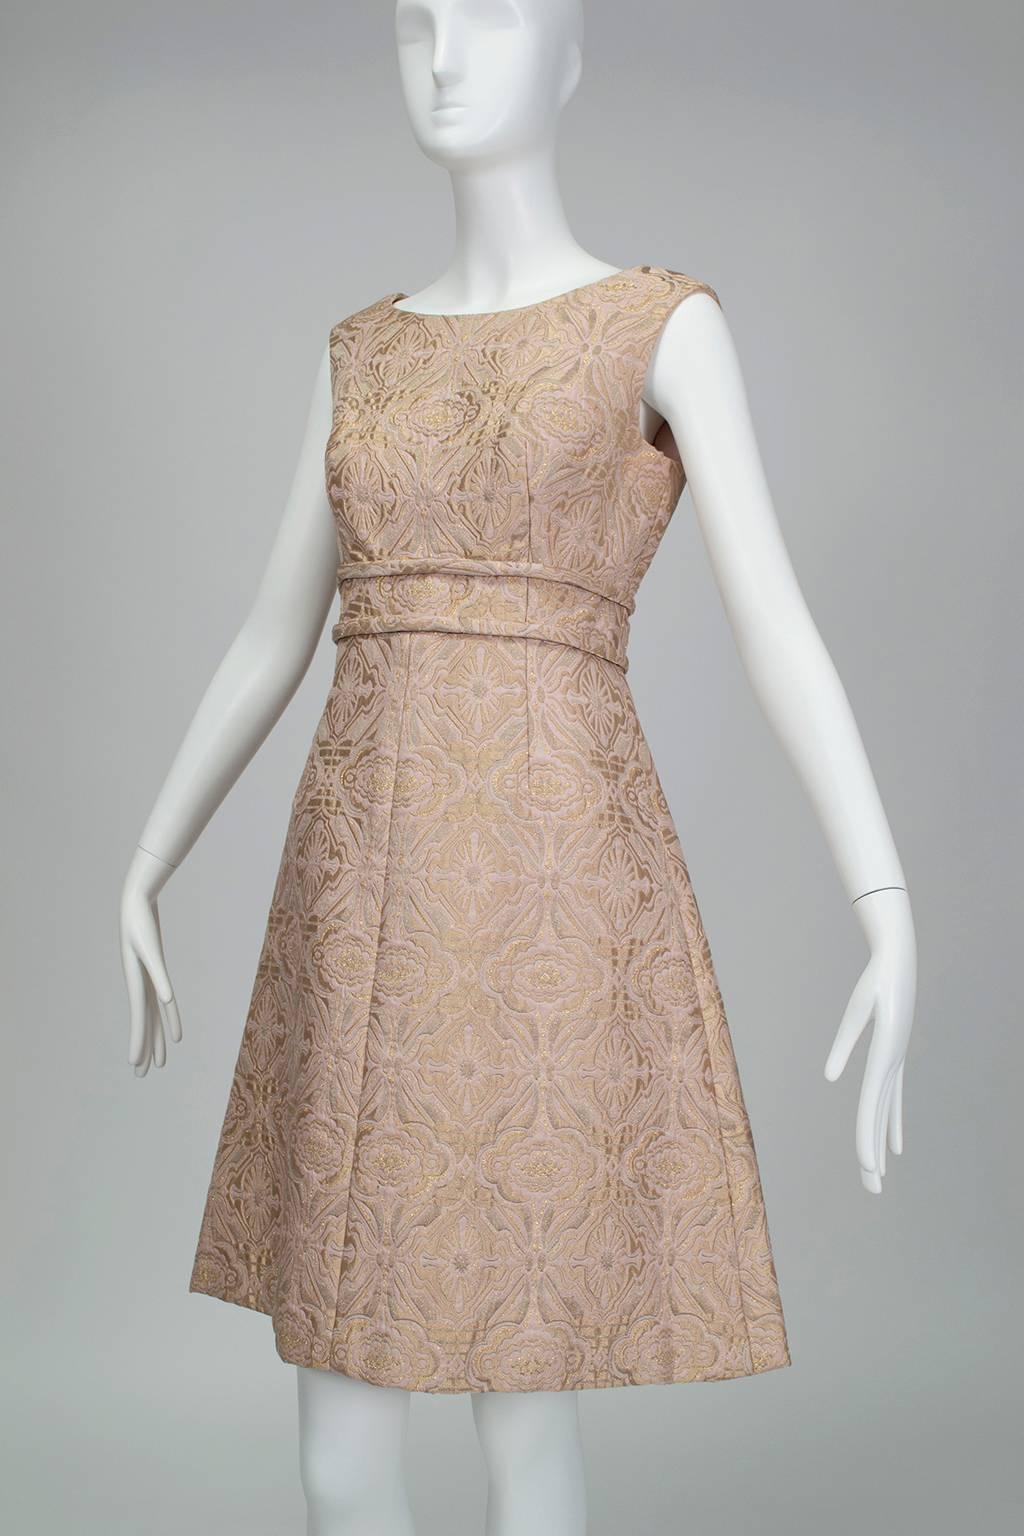 Women's Pink and Gold Jacquard A-Line Dress and Coat Set - Jacome Estate, 1960s